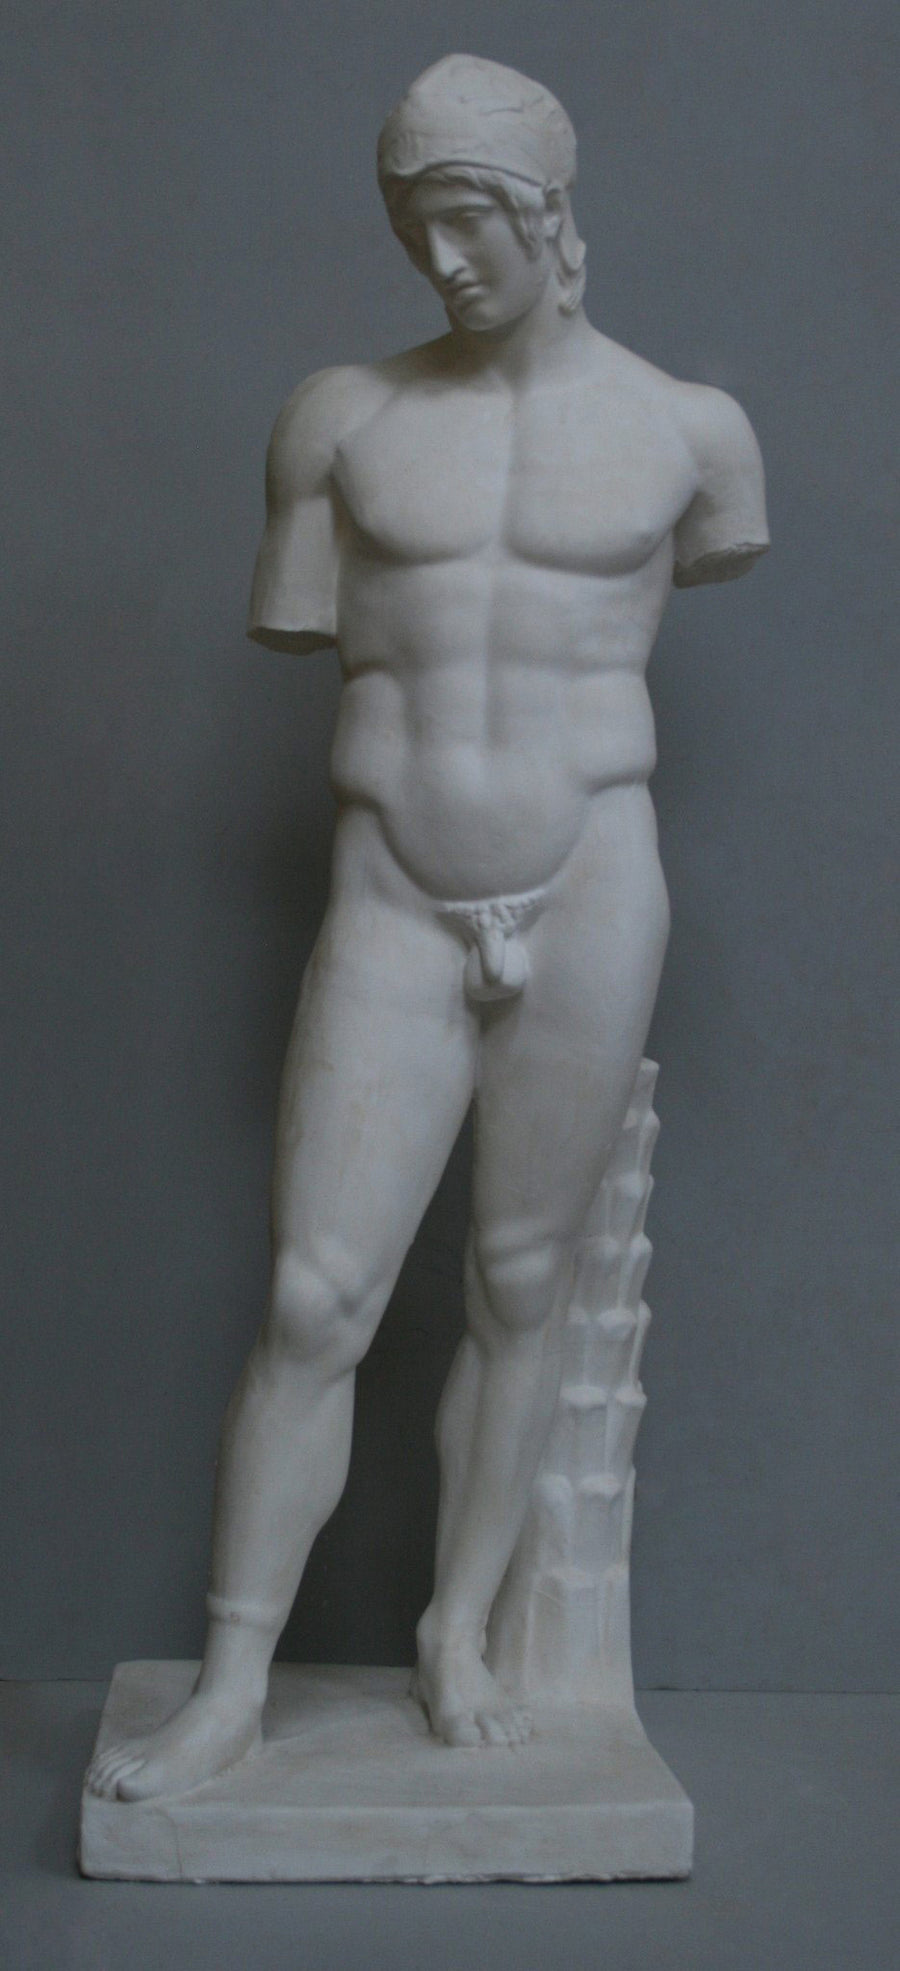 photo of plaster cast of sculpture of nude male, namely the god Ares, without arms and wearing a helmet with a supporting tree trunk, on a gray background